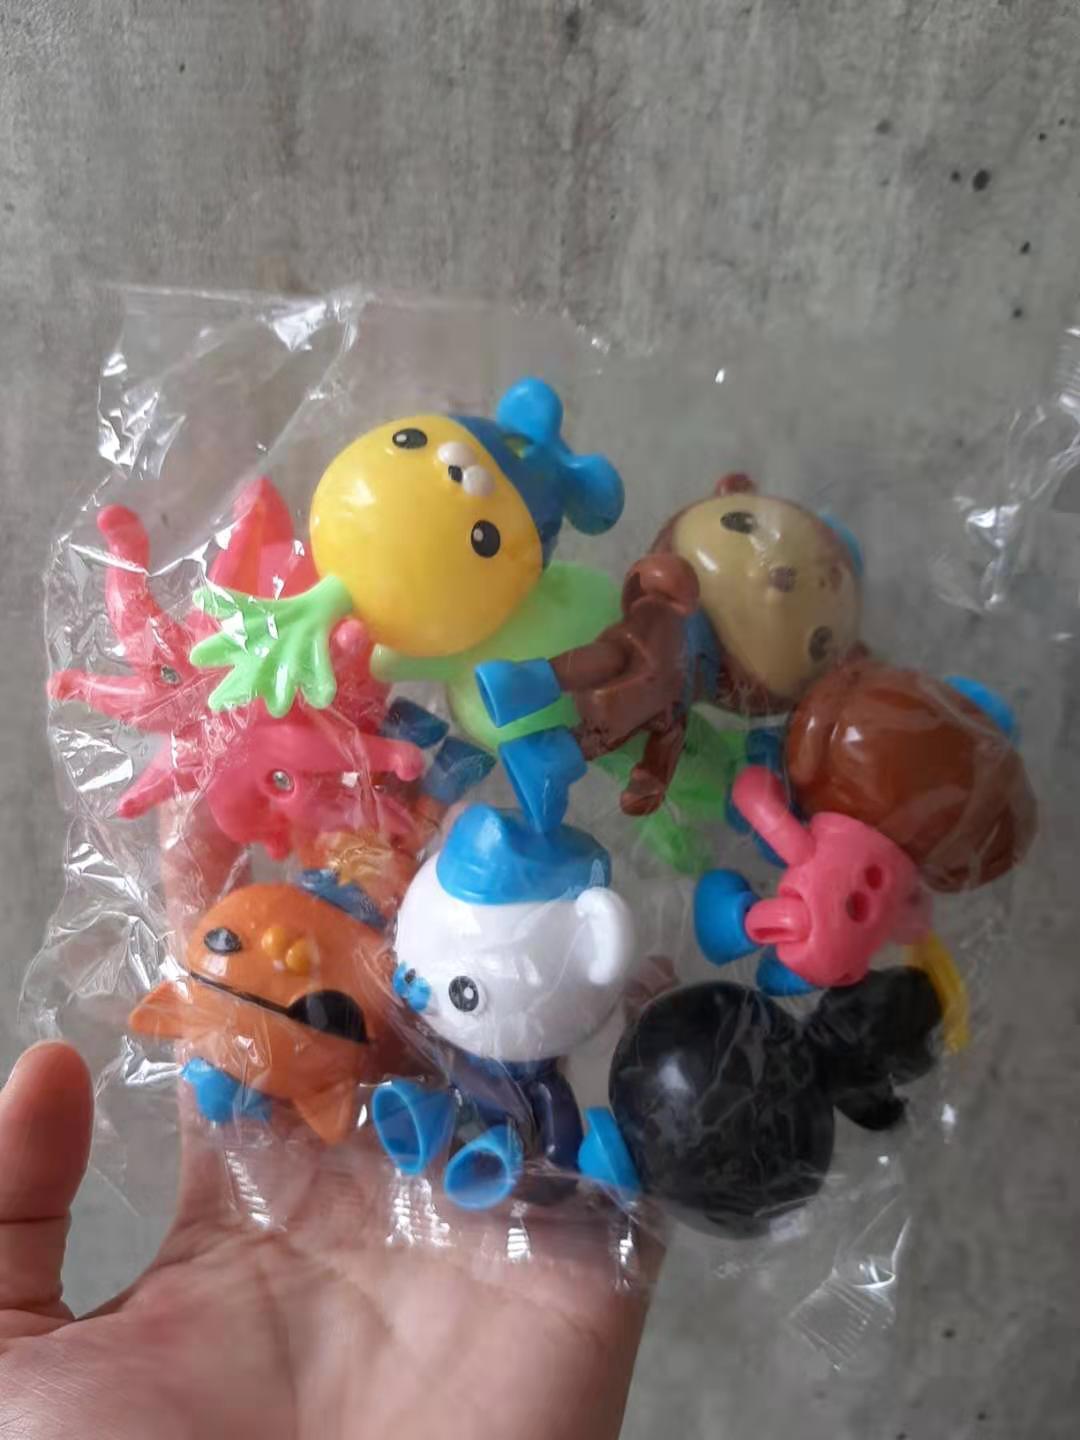 8pcs Octonauts cartoon characters toy figurines for cake decorating or cake toppers